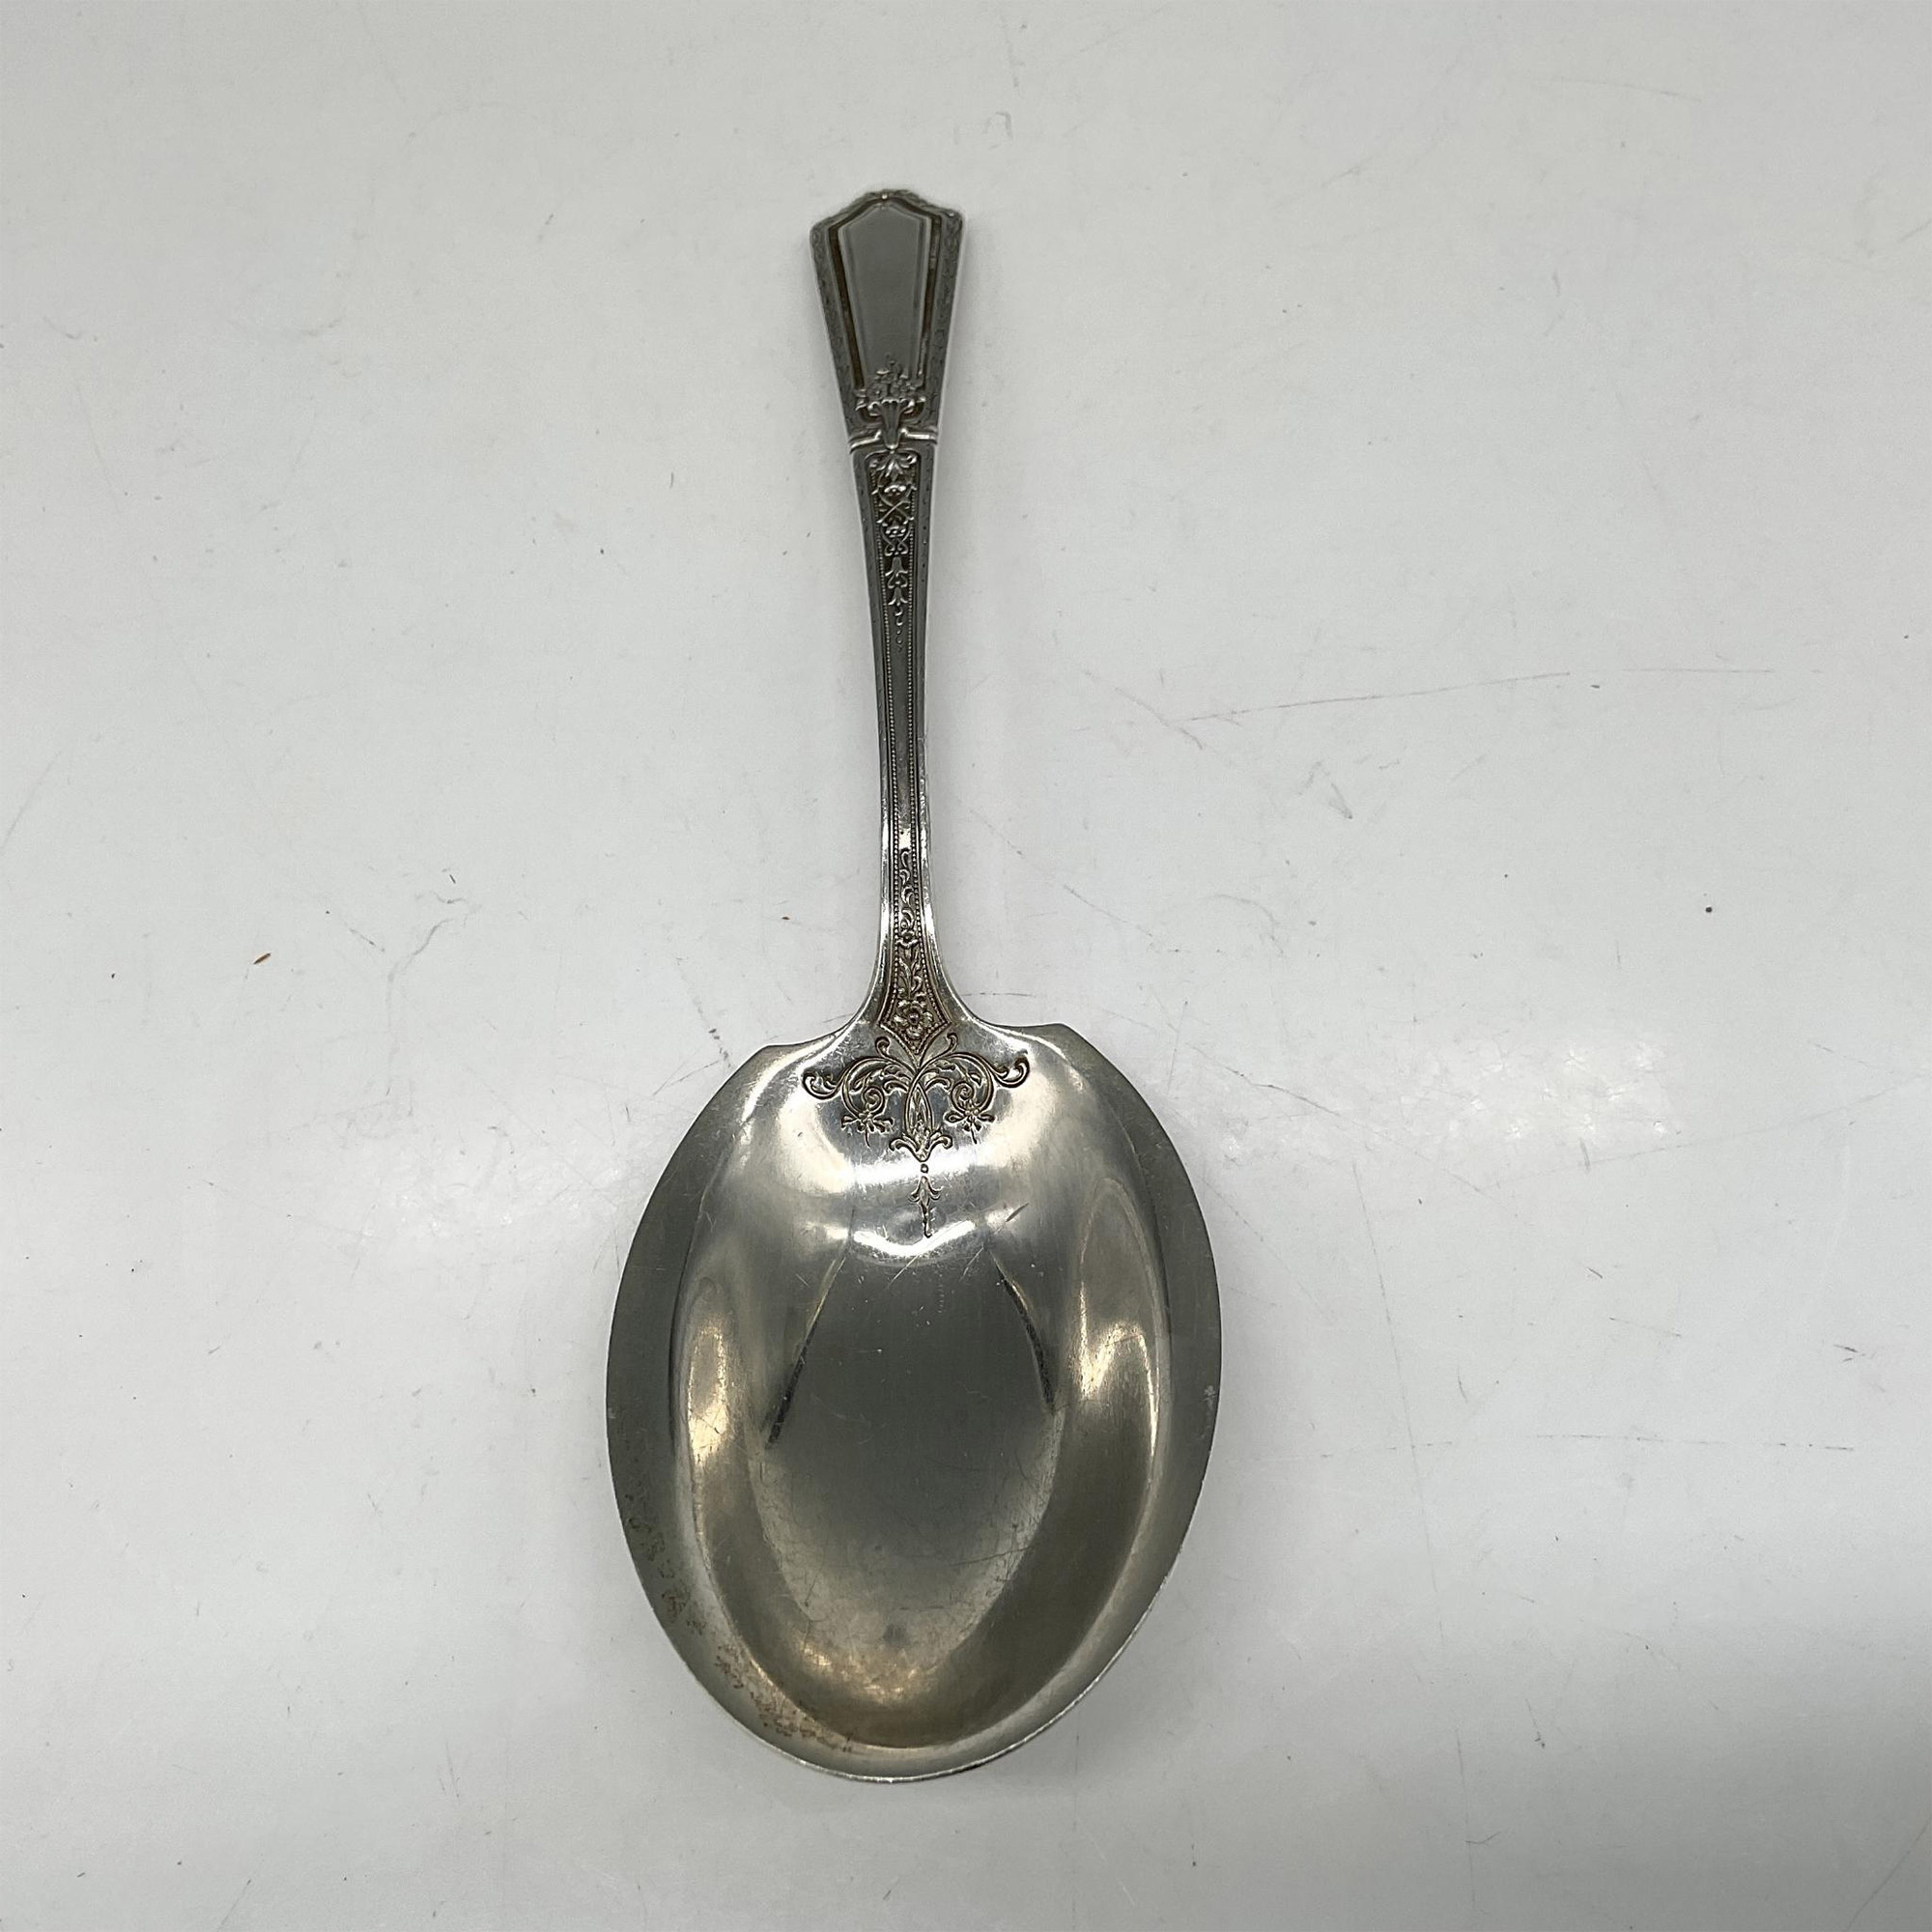 American Sterling Silver Serving Spoon - Image 2 of 3